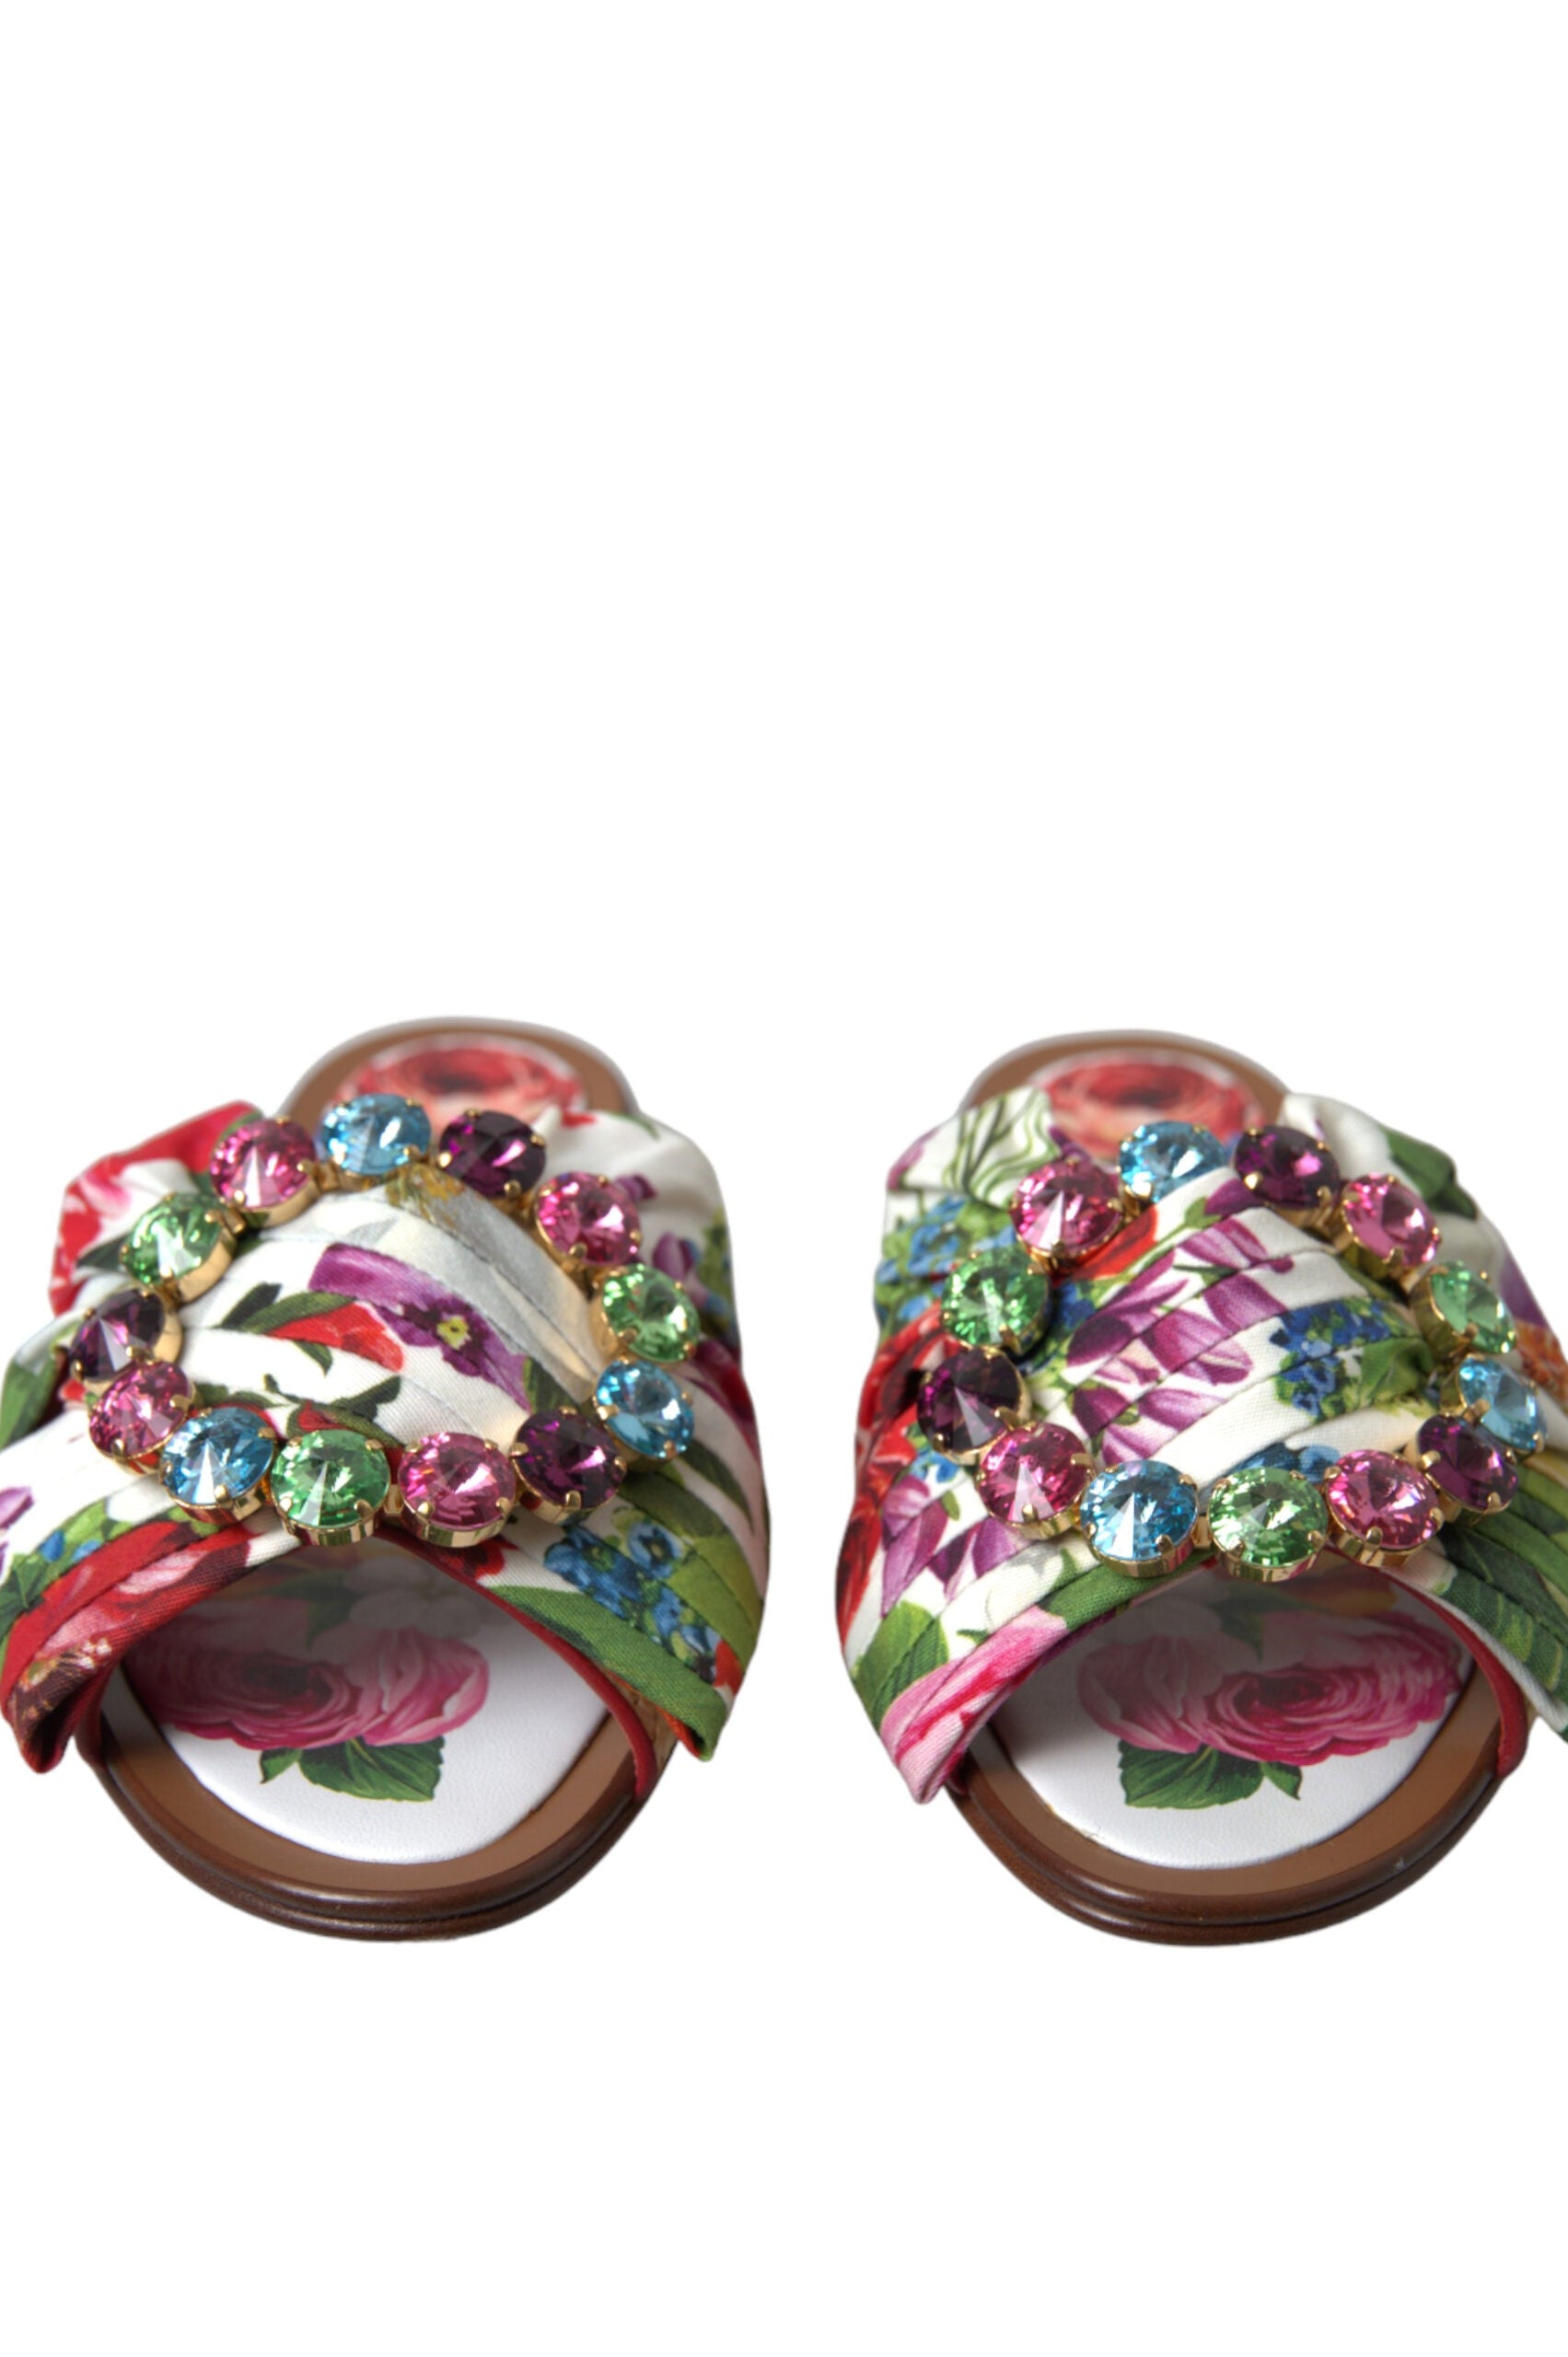 Dolce & Gabbana Multicolor Floral Flats Crystal Sandals Shoes GENUINE AUTHENTIC BRAND LLC